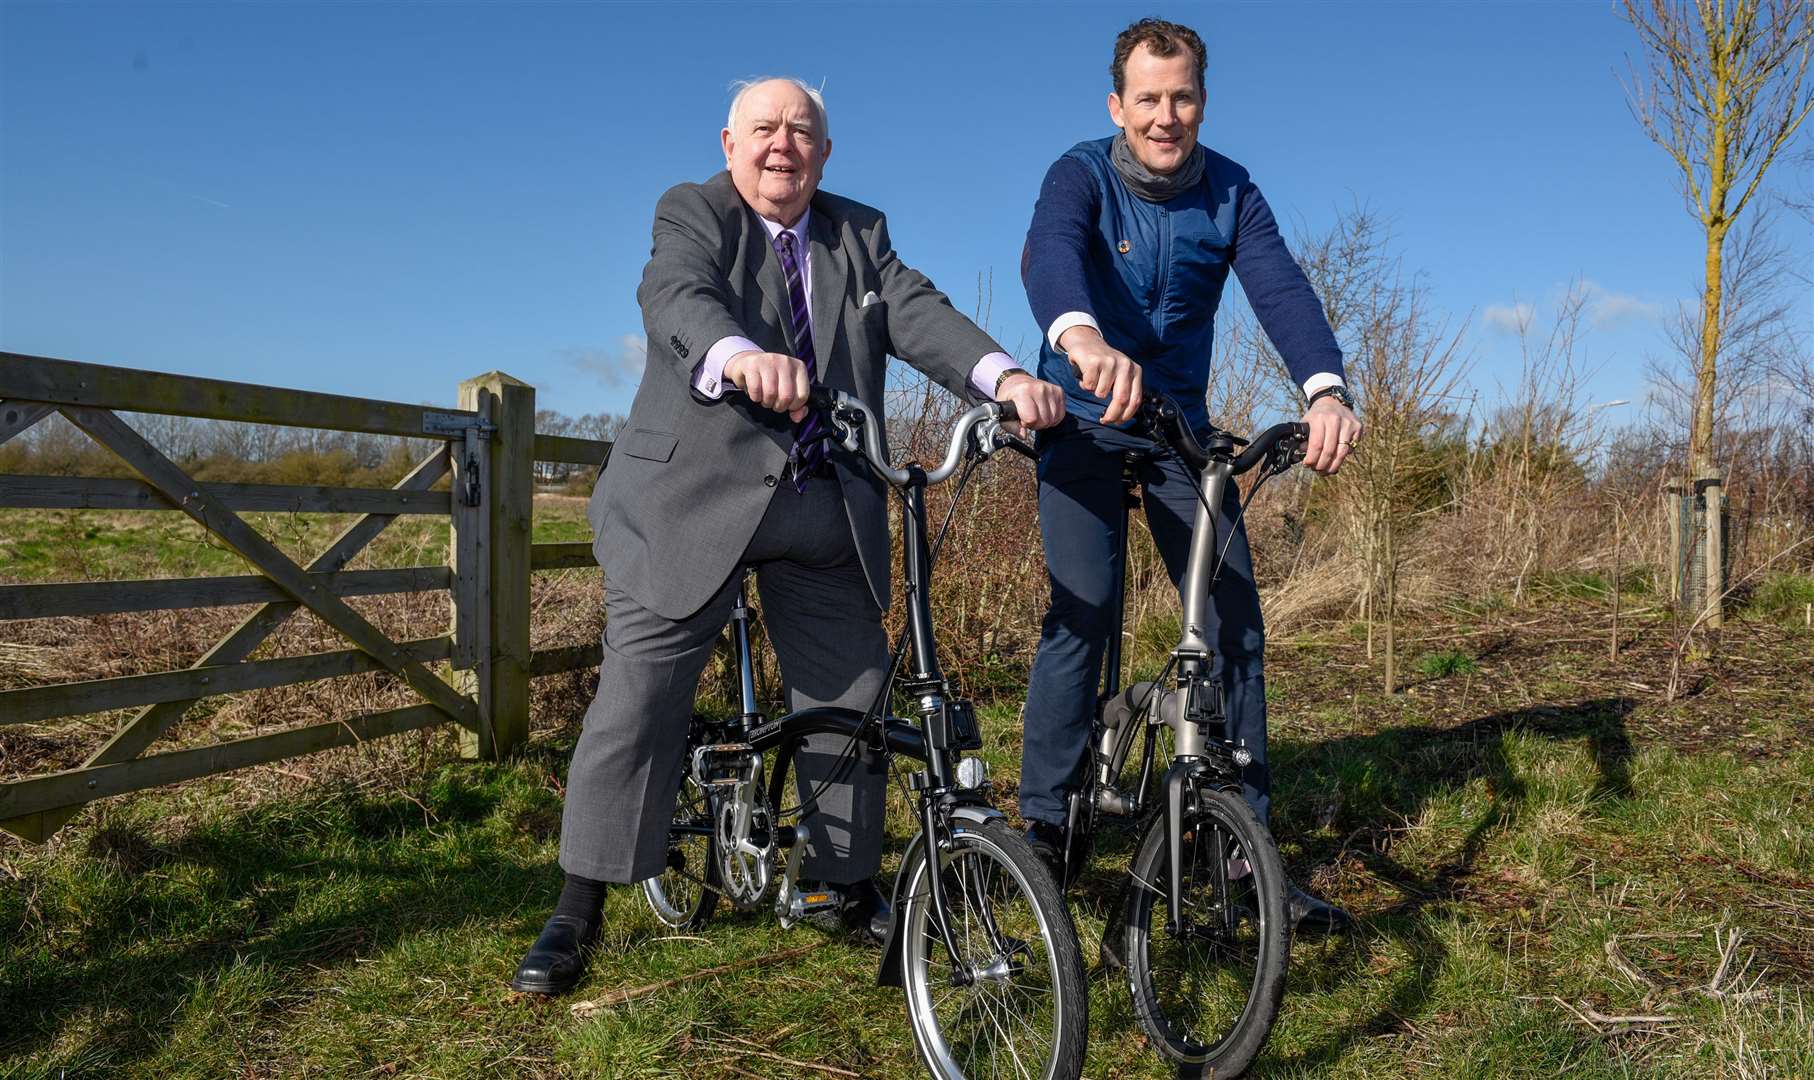 ABC leader Cllr Gerry Clarkson with Will Butler-Adams, CEO at Brompton. Picture: Alan Langley